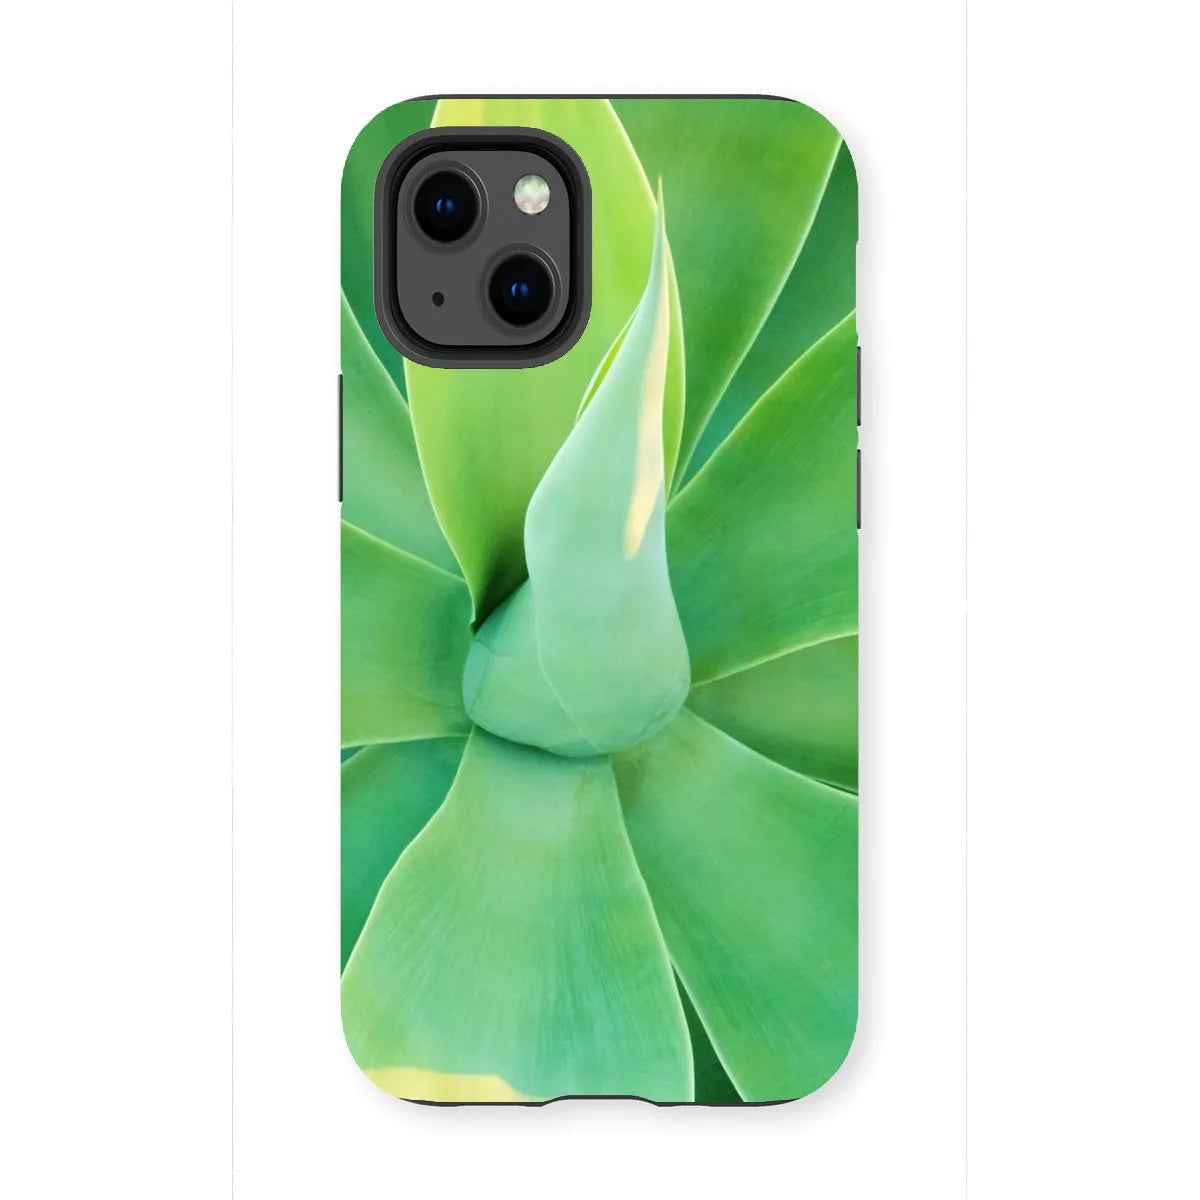 In Bloom Too Tough Phone Case - Iphone 13 Mini / Matte - Mobile Phone Cases - Aesthetic Art